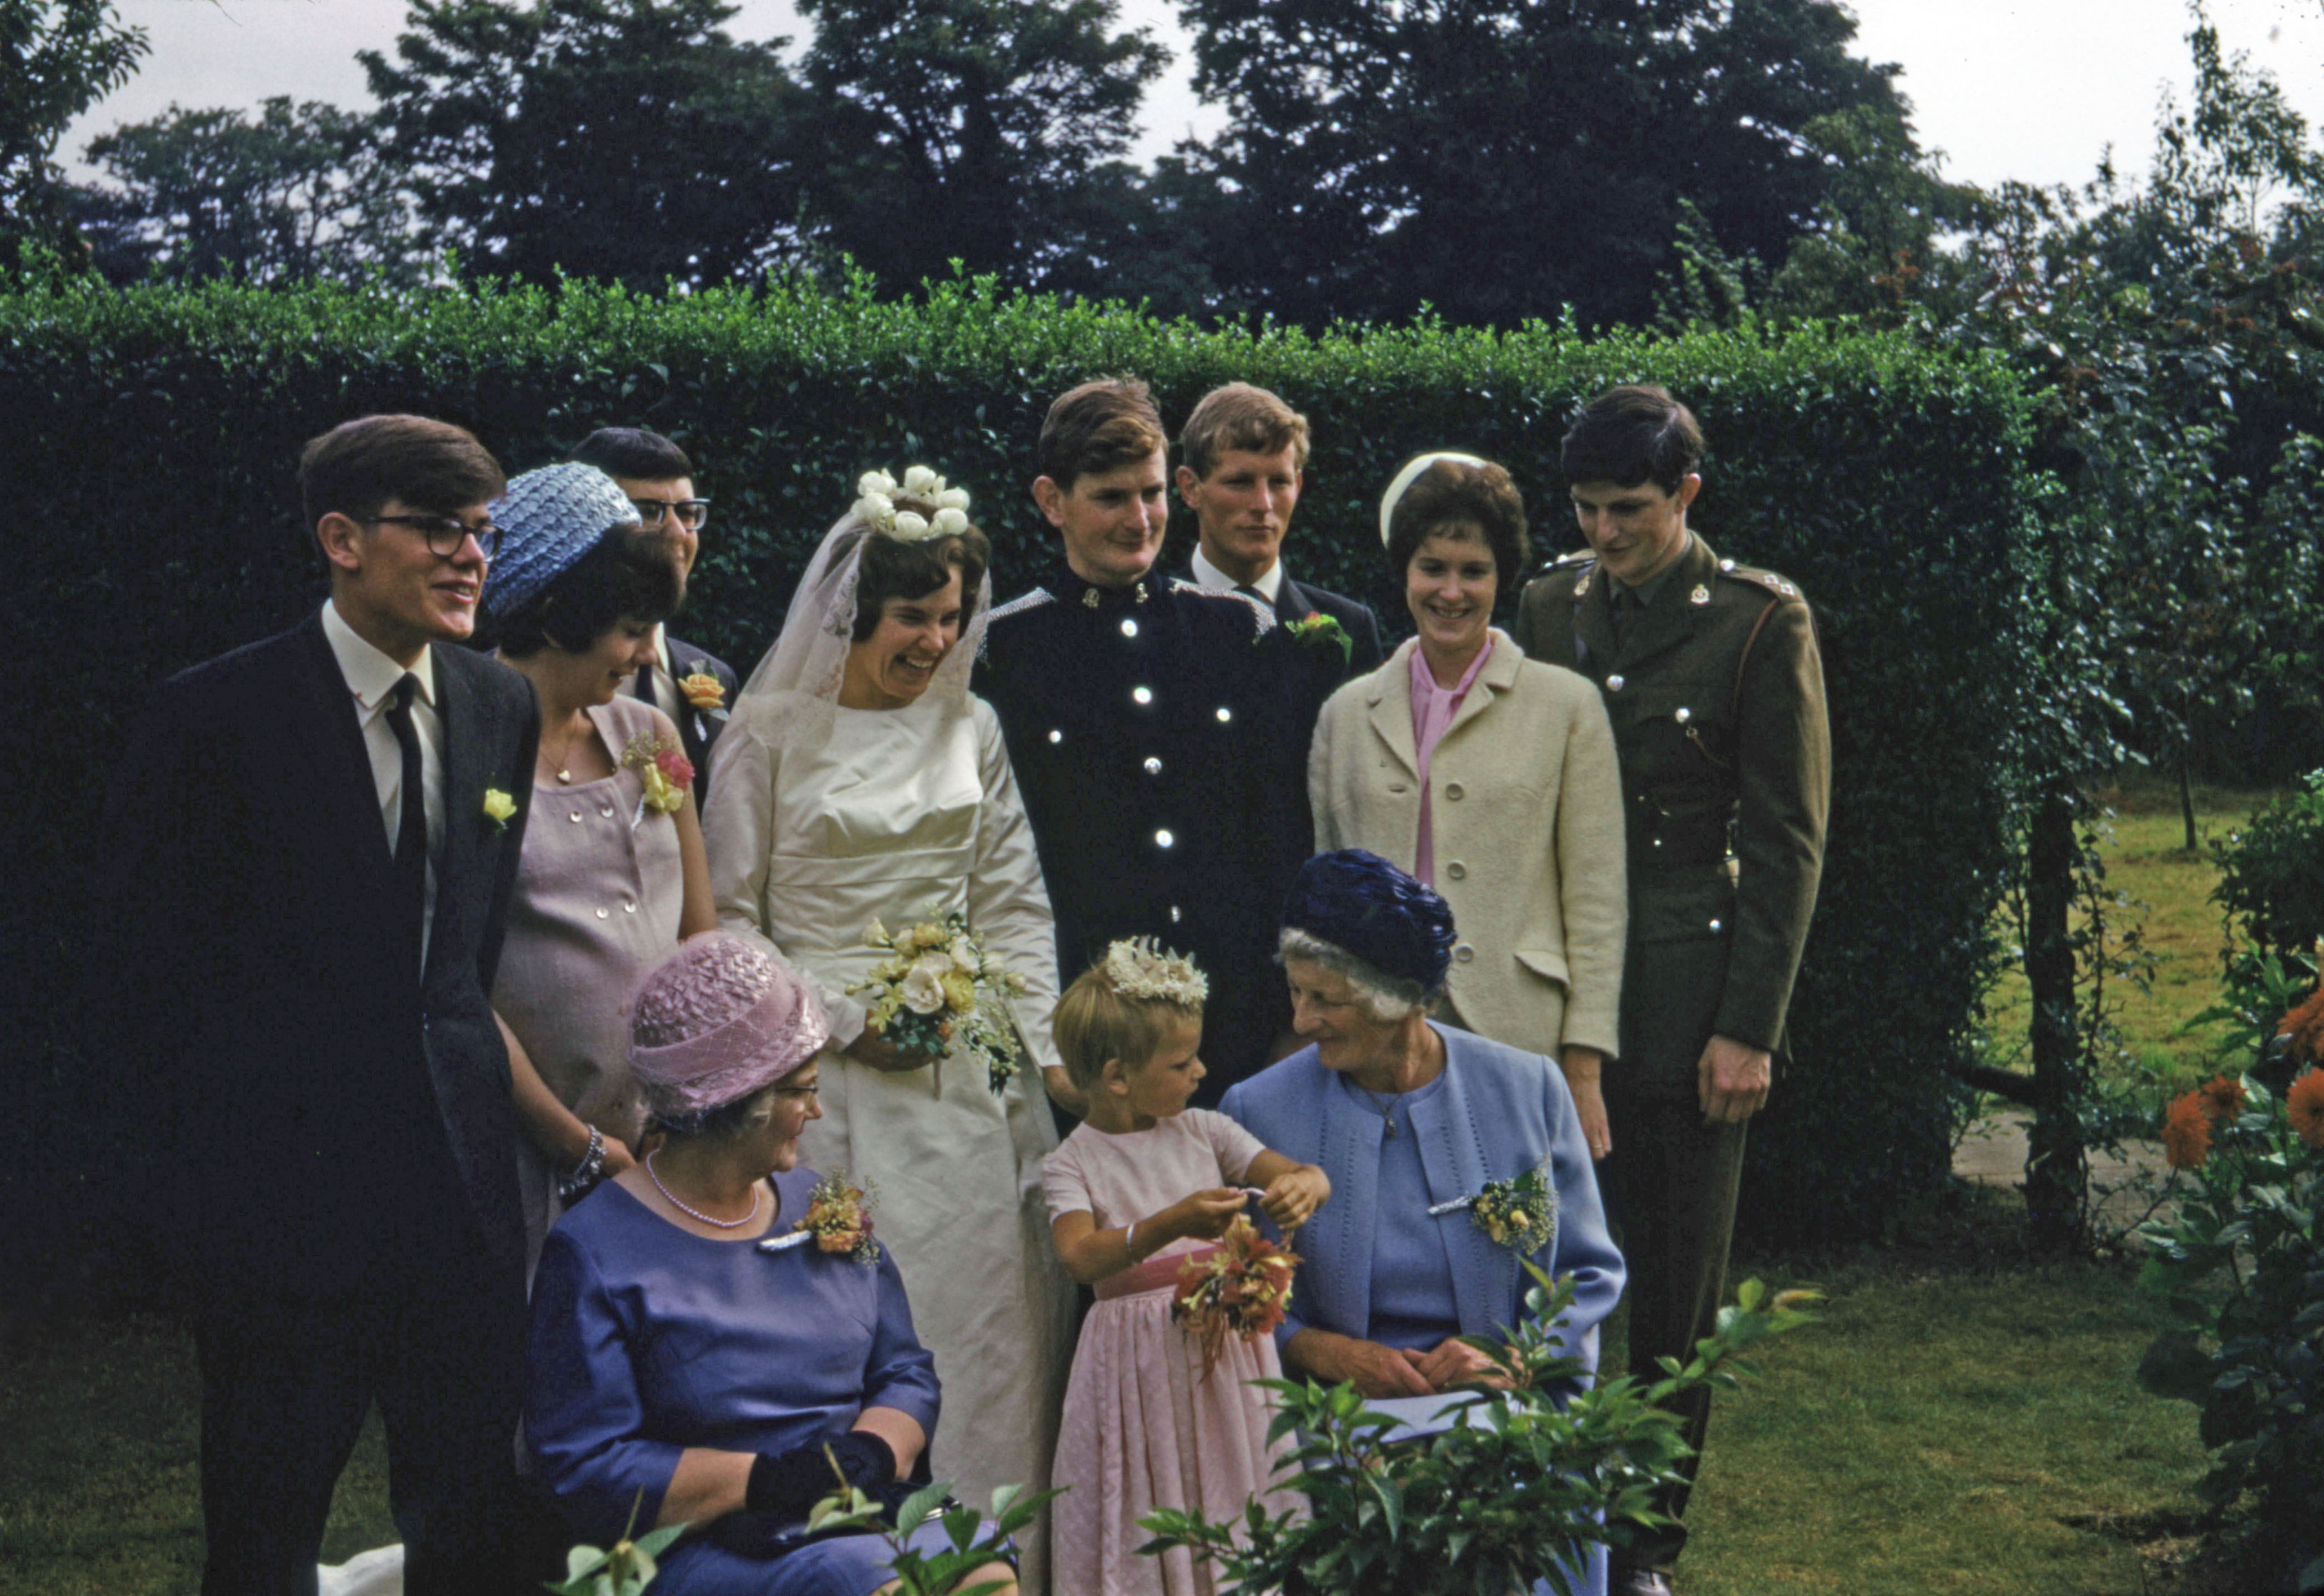 19 Aug 1965 Another group picture.